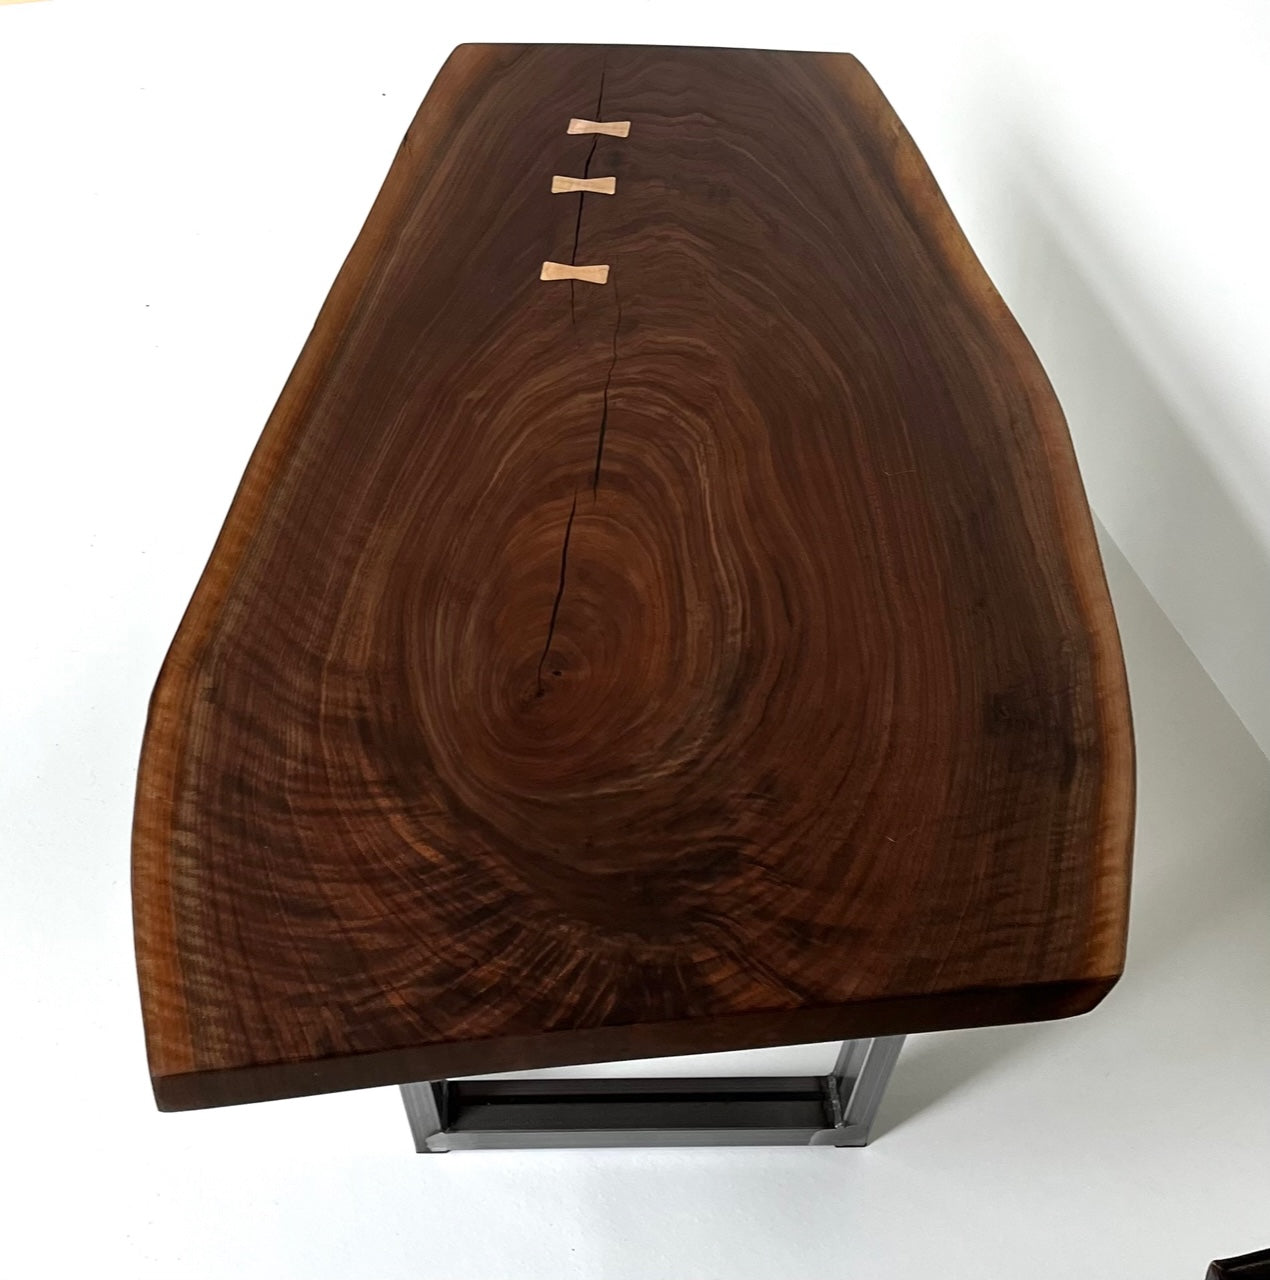 Live Edge Coffee Table -Walnut with Butterfly inlay